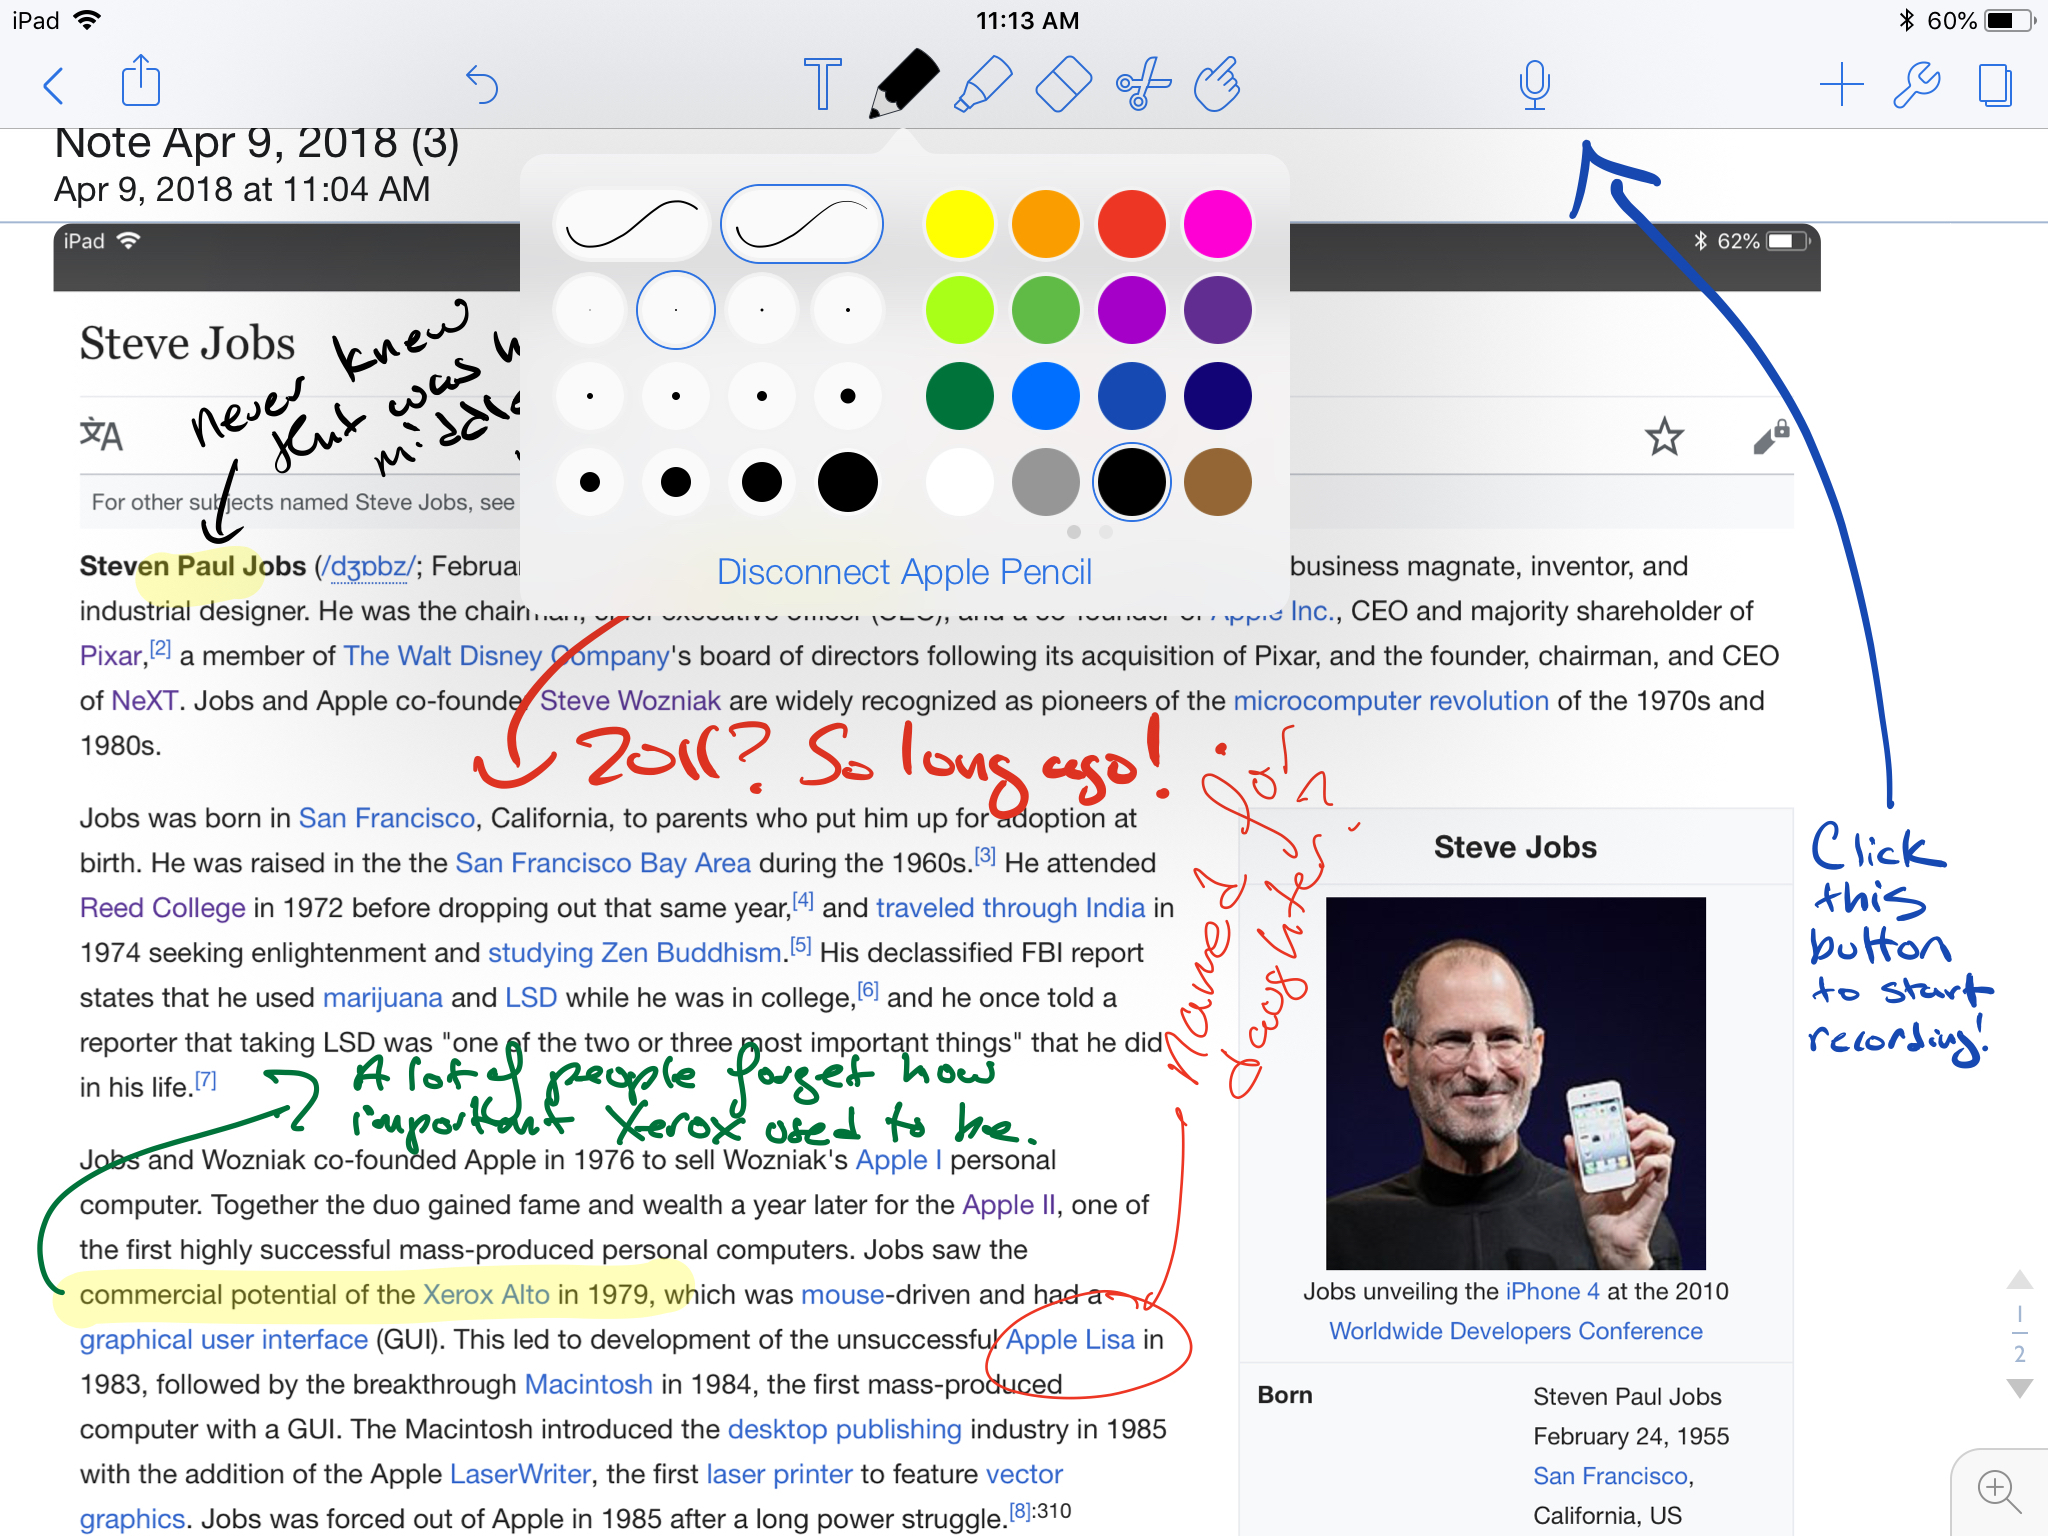 Note Taking Apps For Mac And Iphone